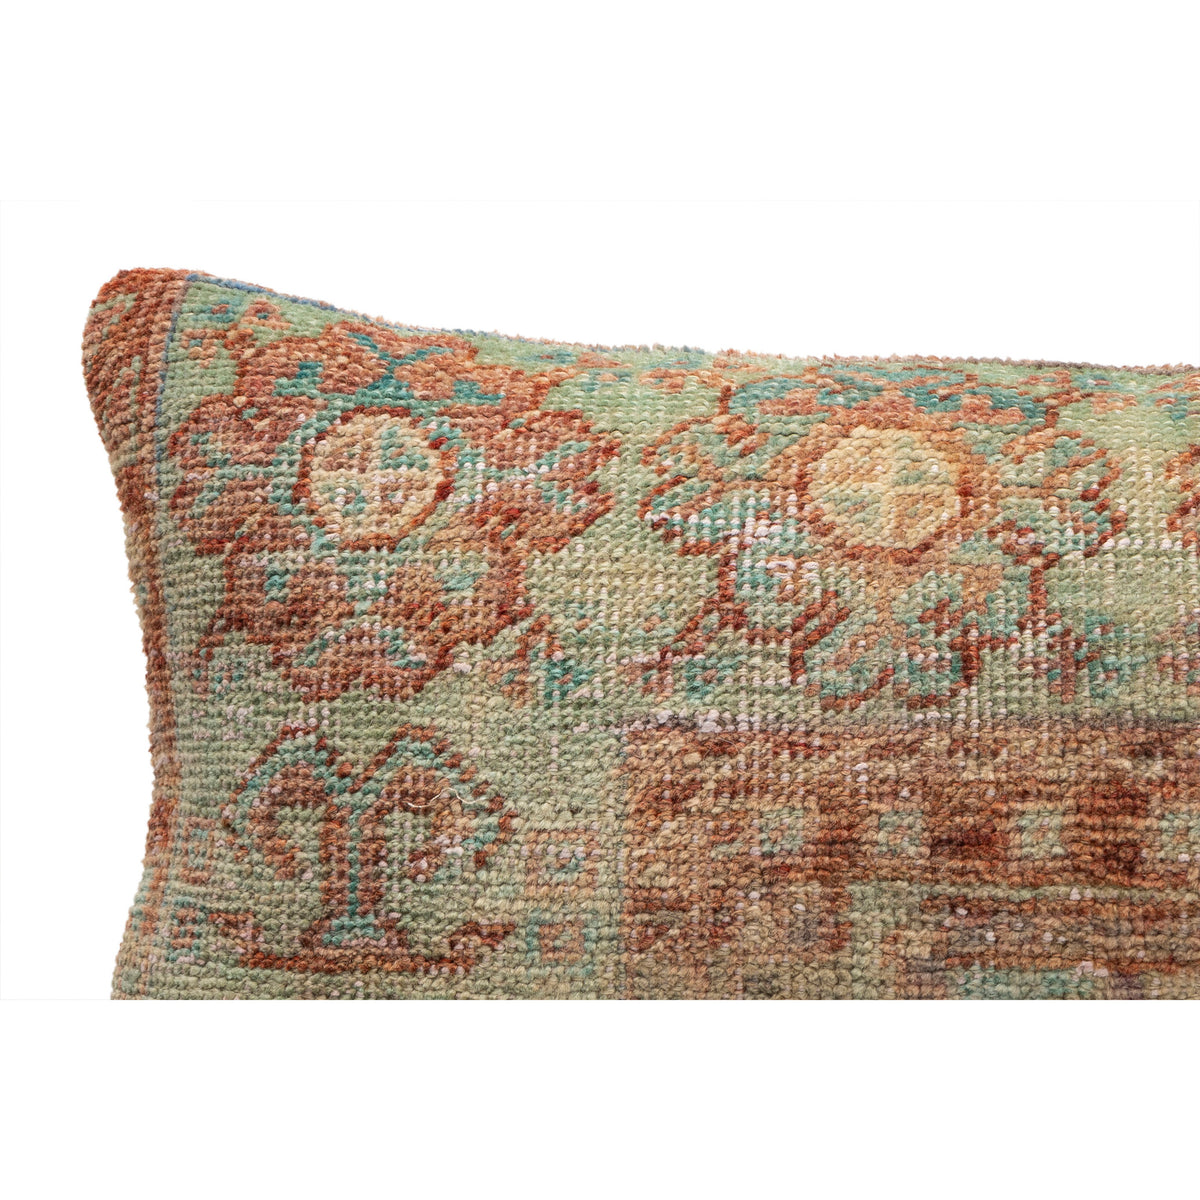 Handwoven Vintage Rug Pillow Cover 12" x 20"